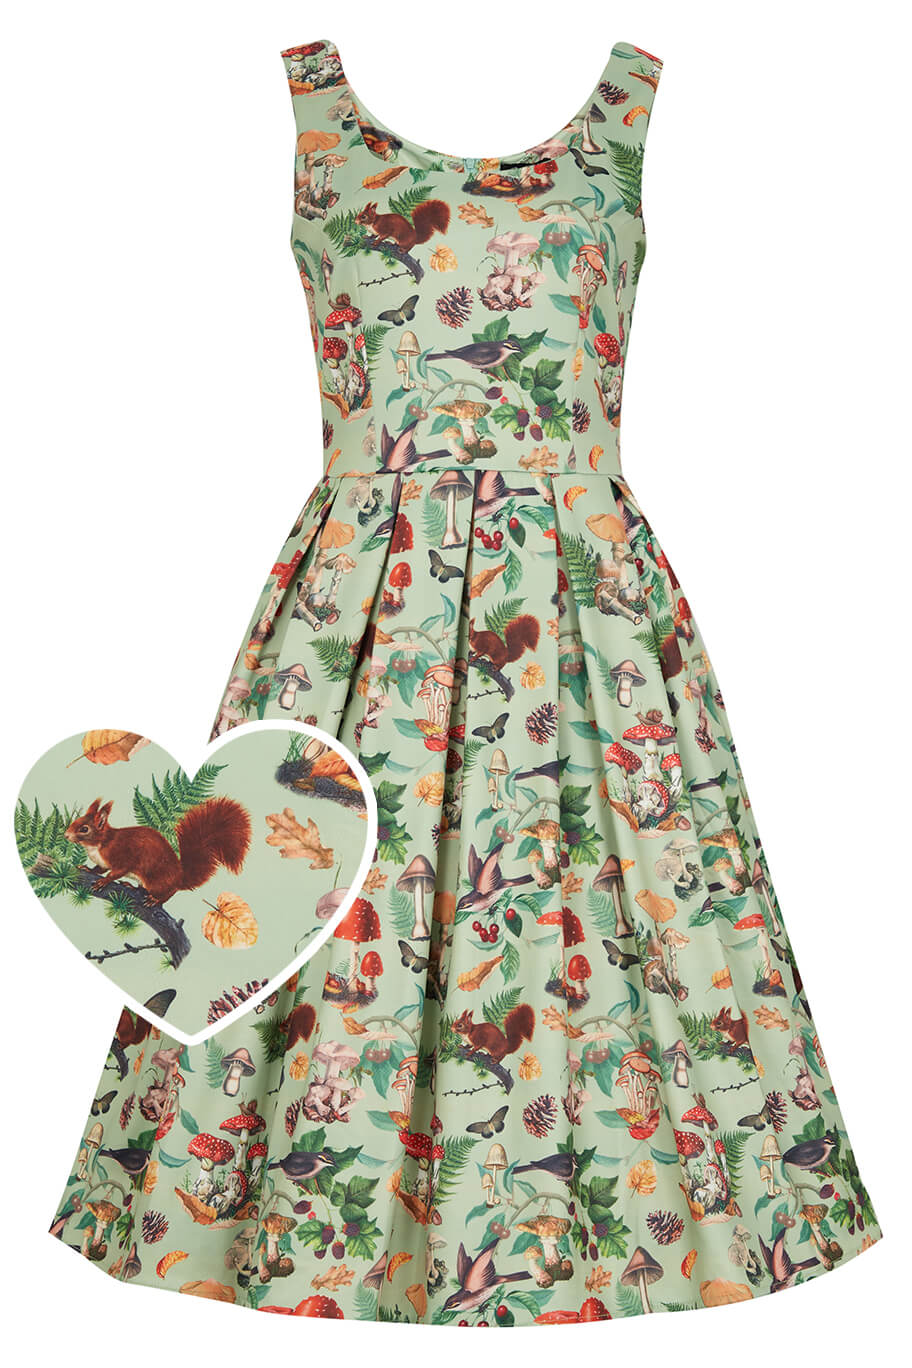 Green Woodland Print Vintage Swing Dress front view